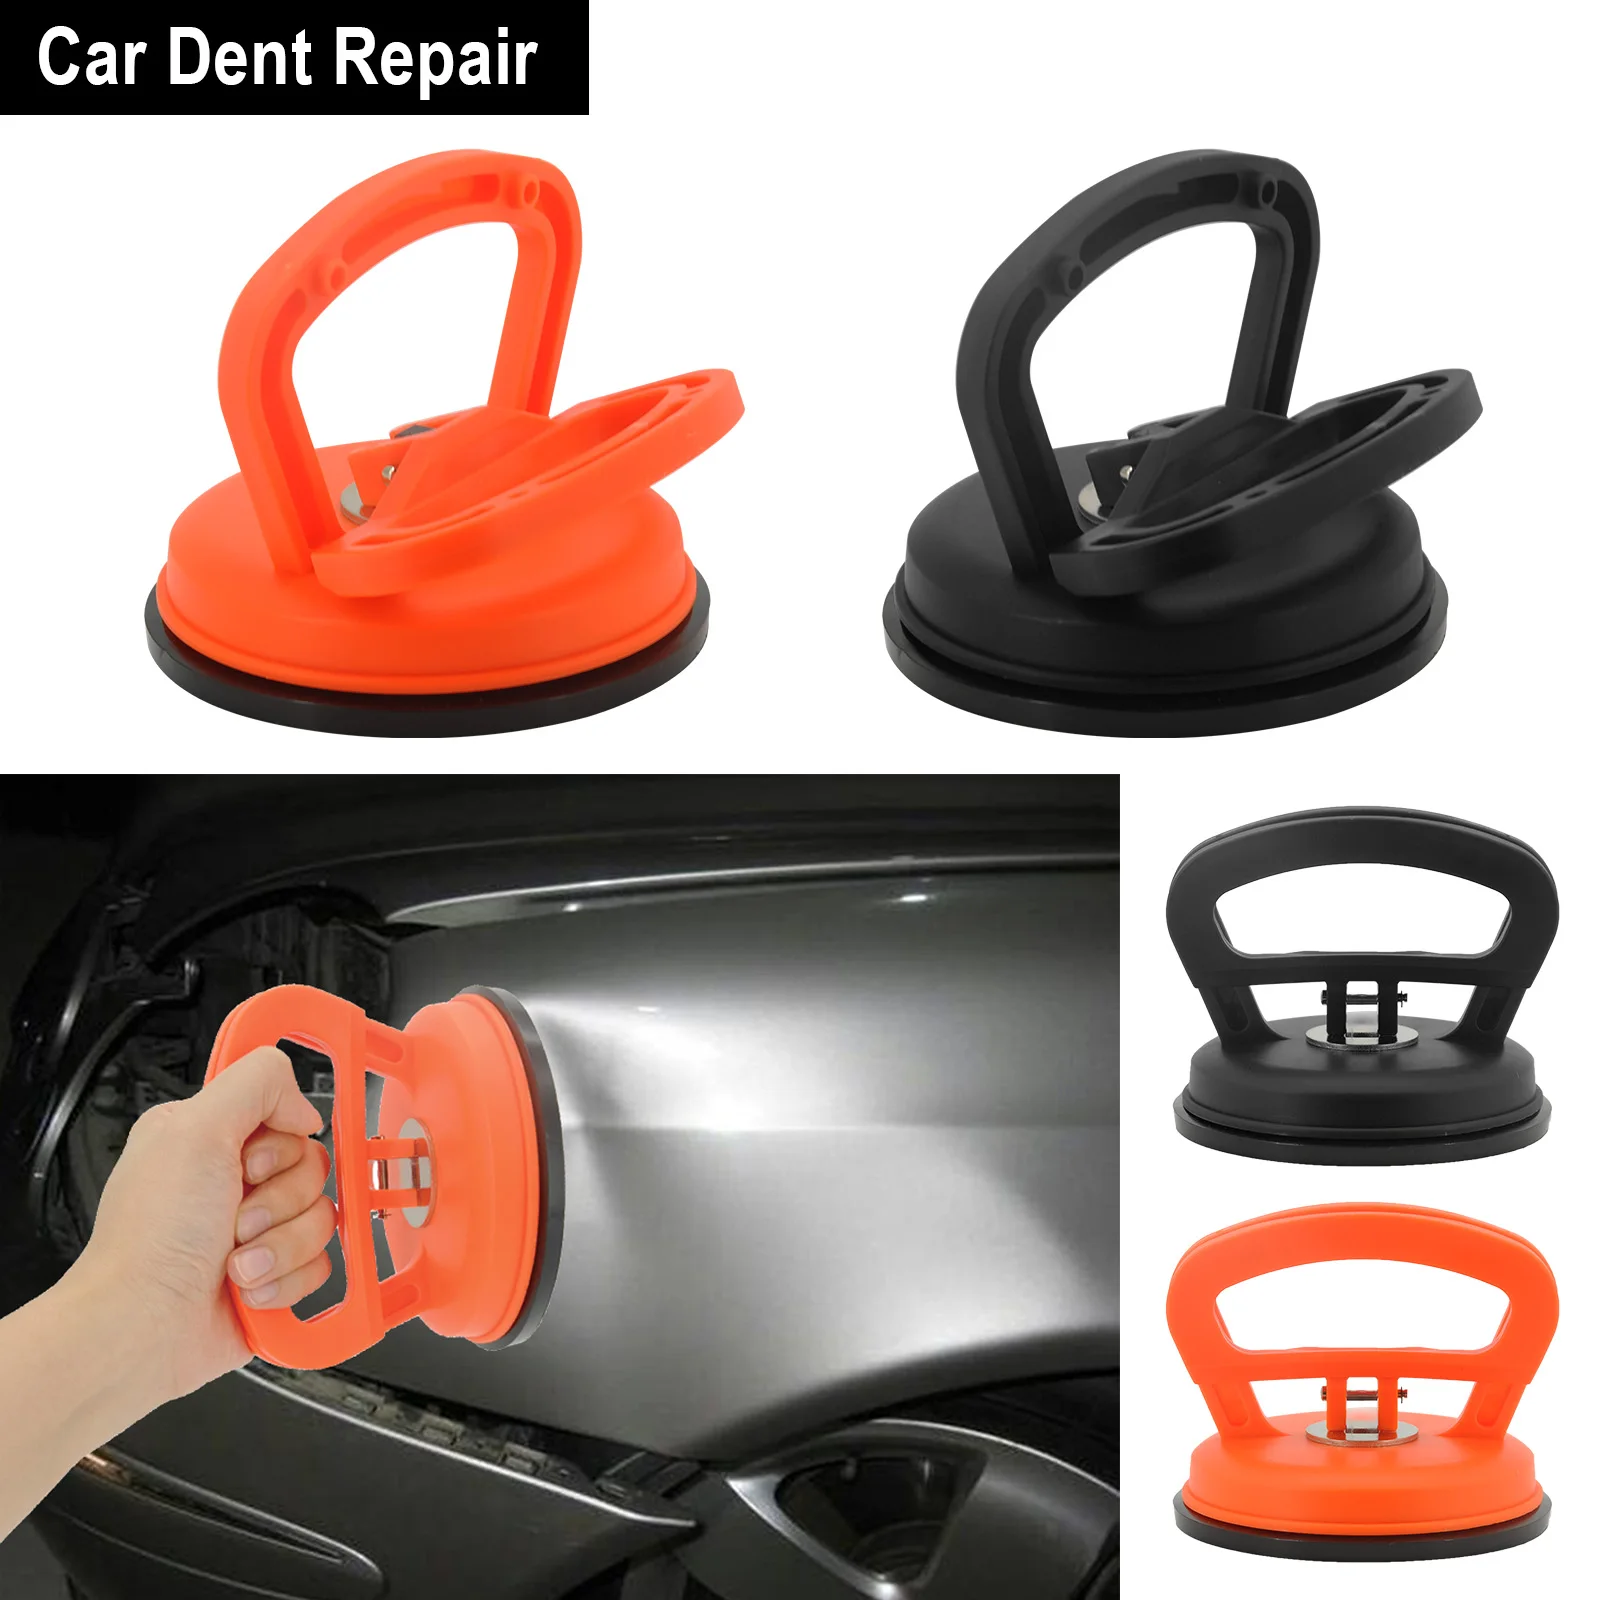 

Big Size Auto Fix Dent Removal Tools Puller Tools Car Dent Repair Strong Suction Cup for Sucker Accessories Handle Lifter Glass